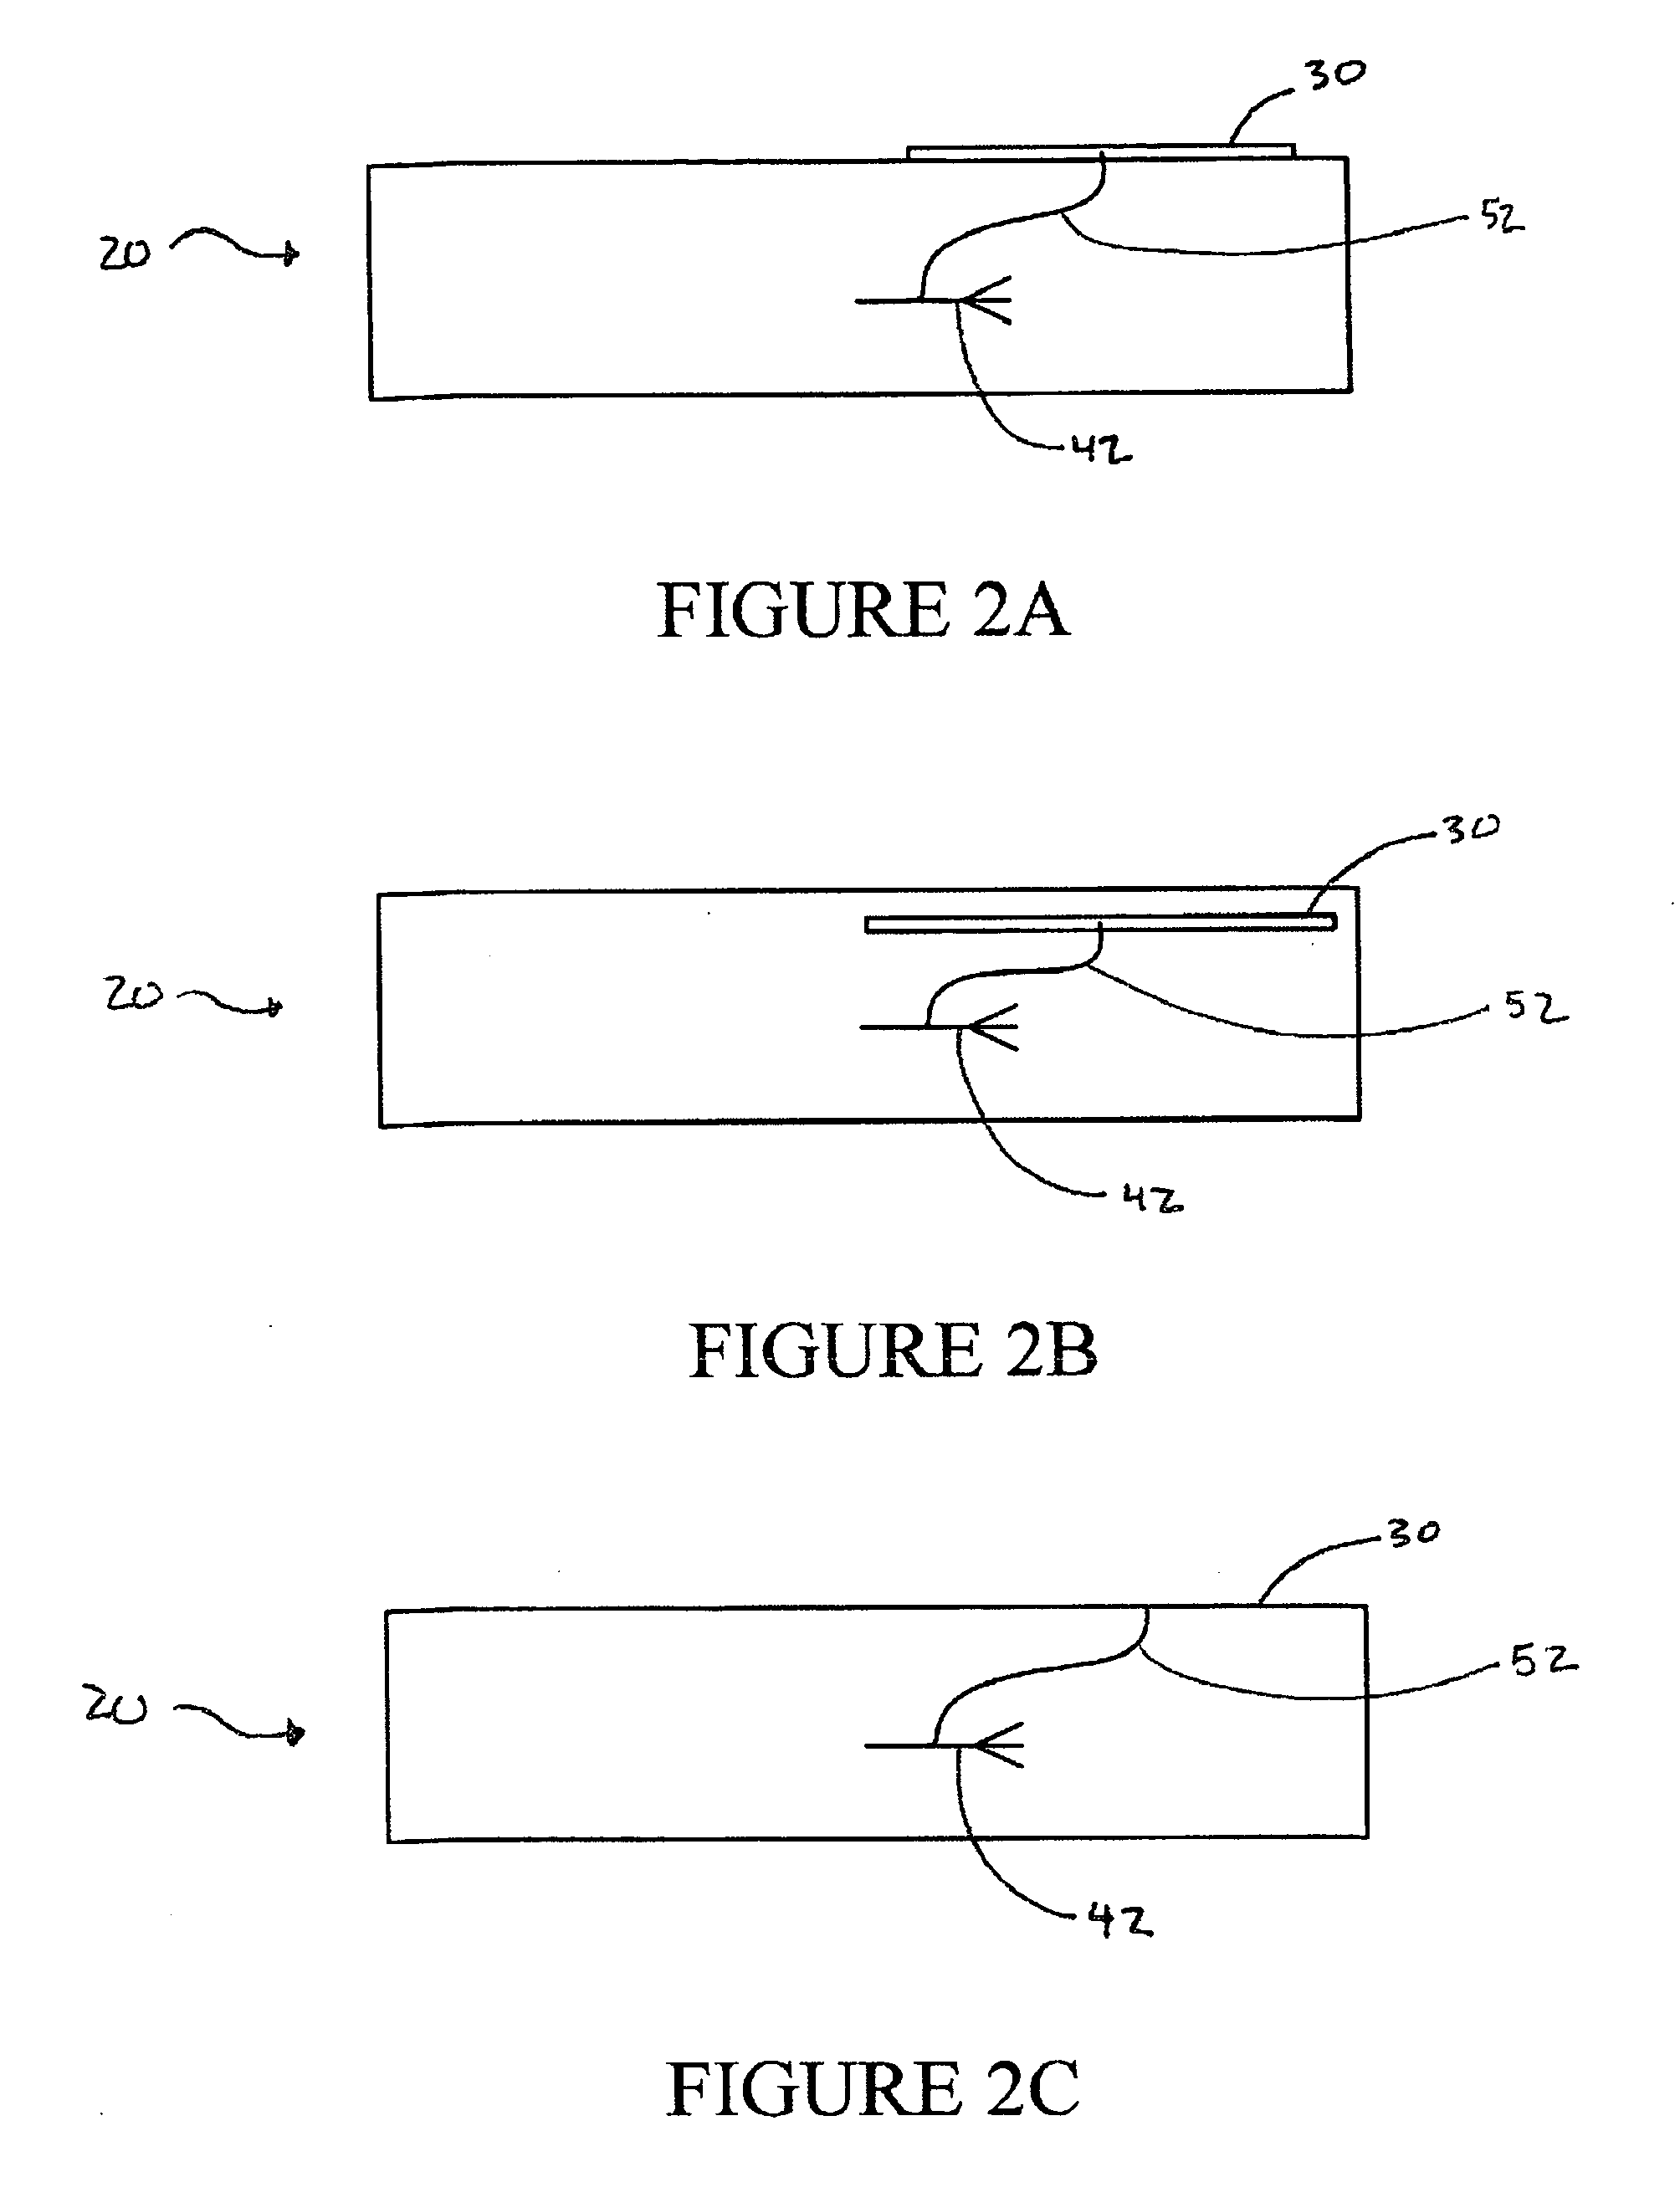 Antenna configured for low frequency application